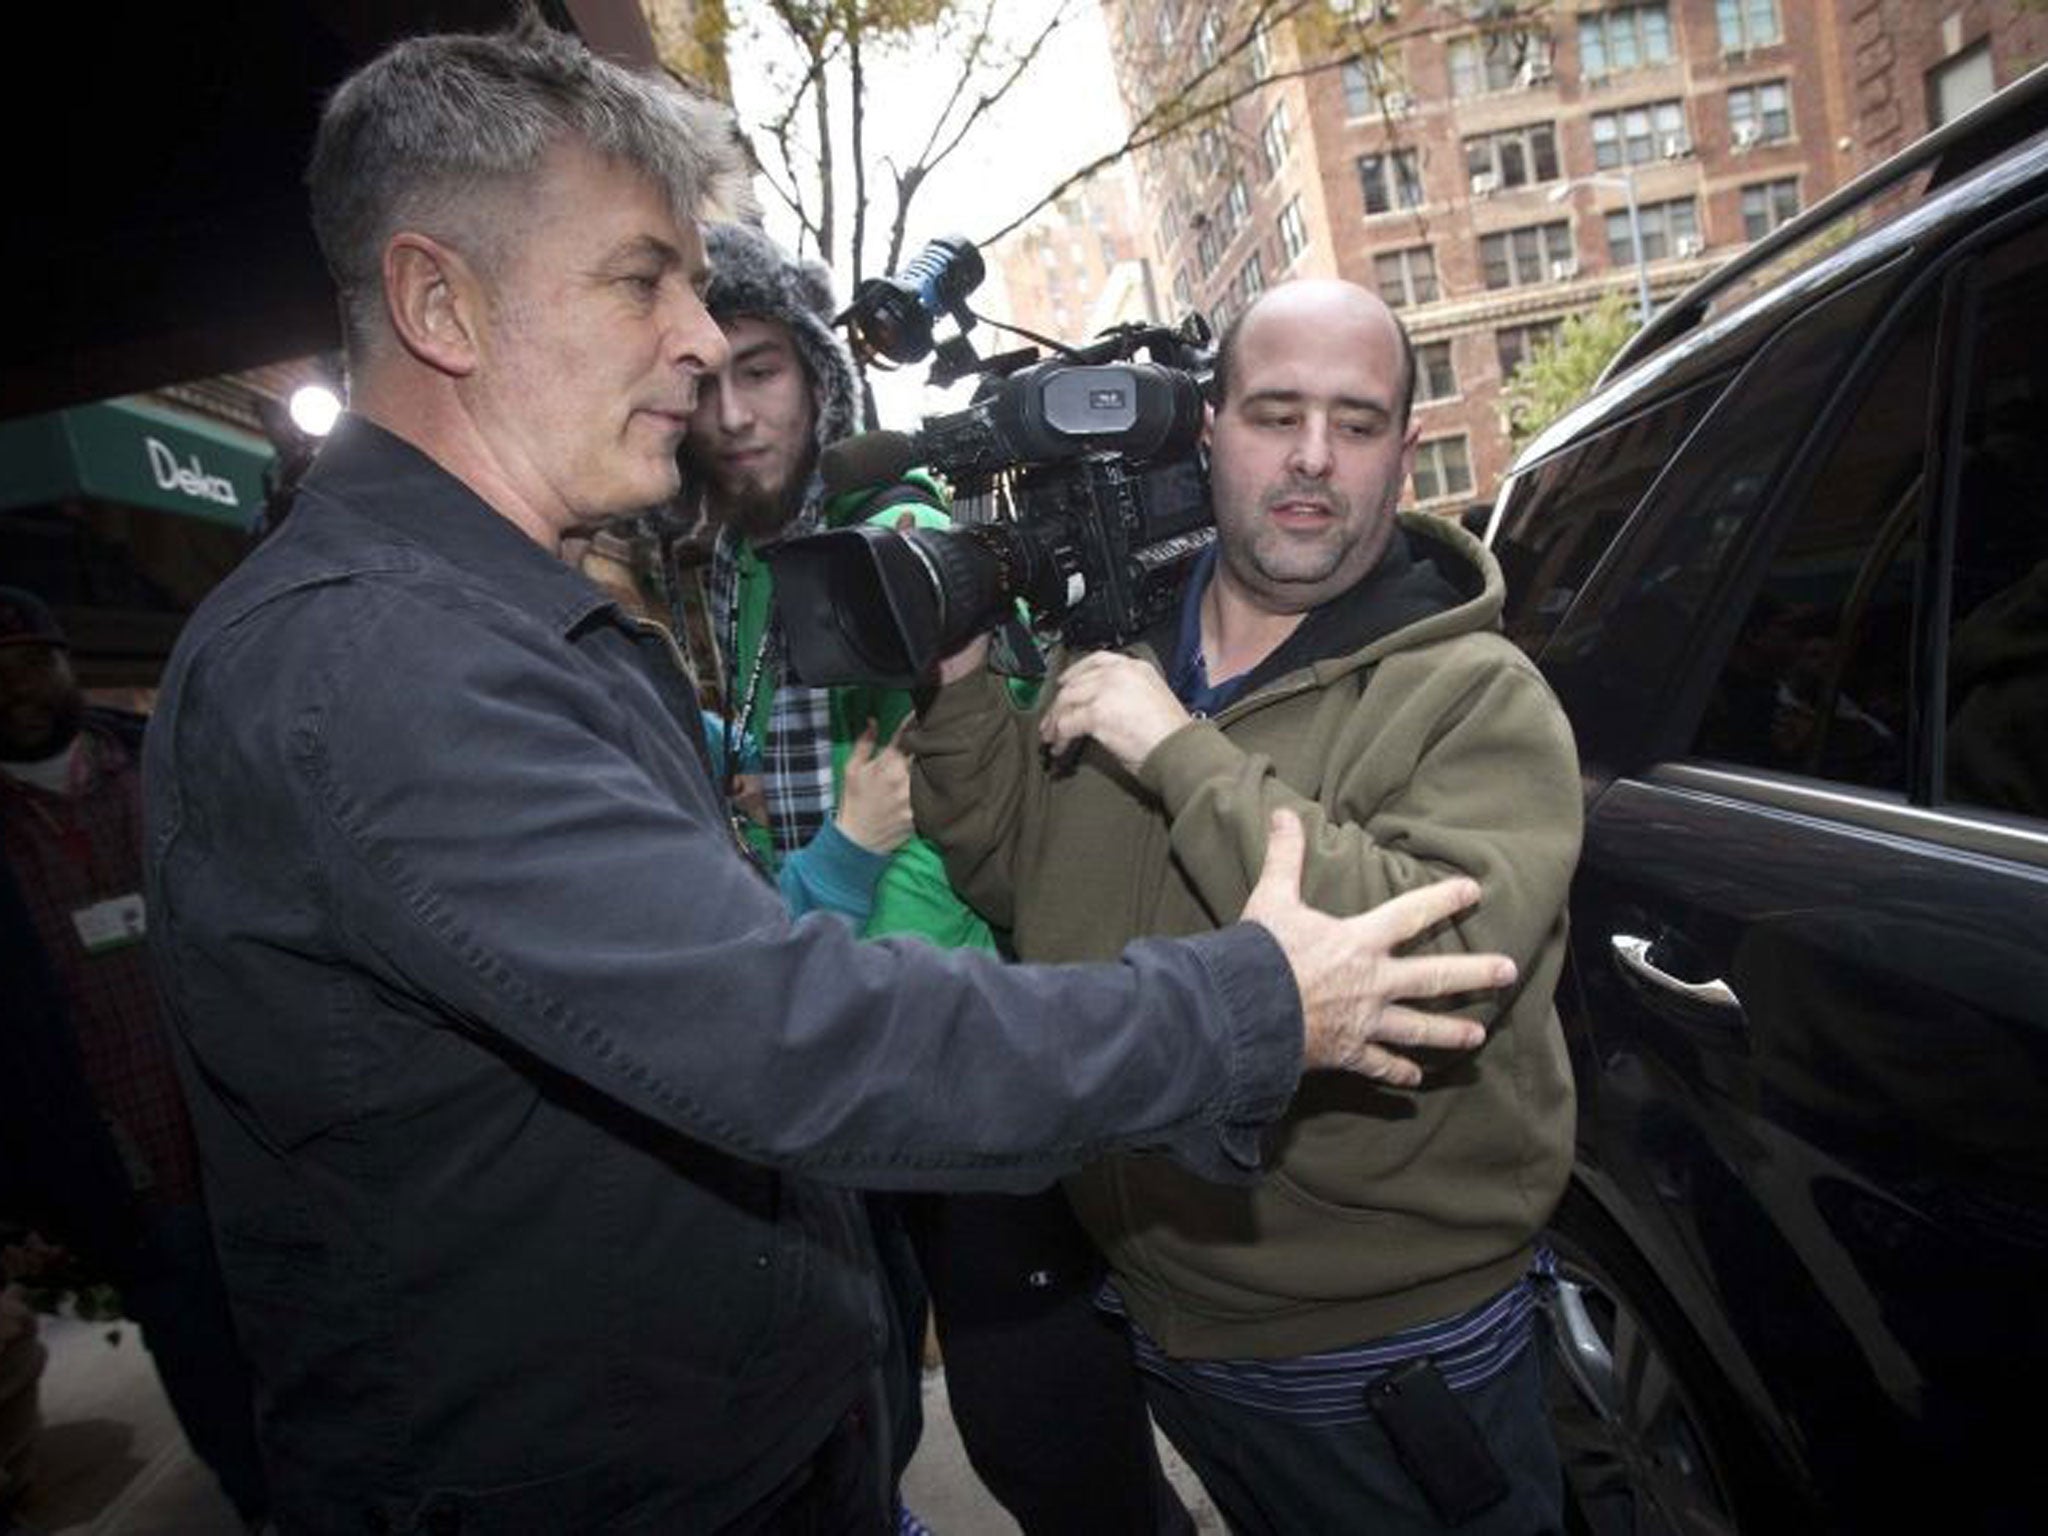 Alec Baldwin has a troubled history with the press